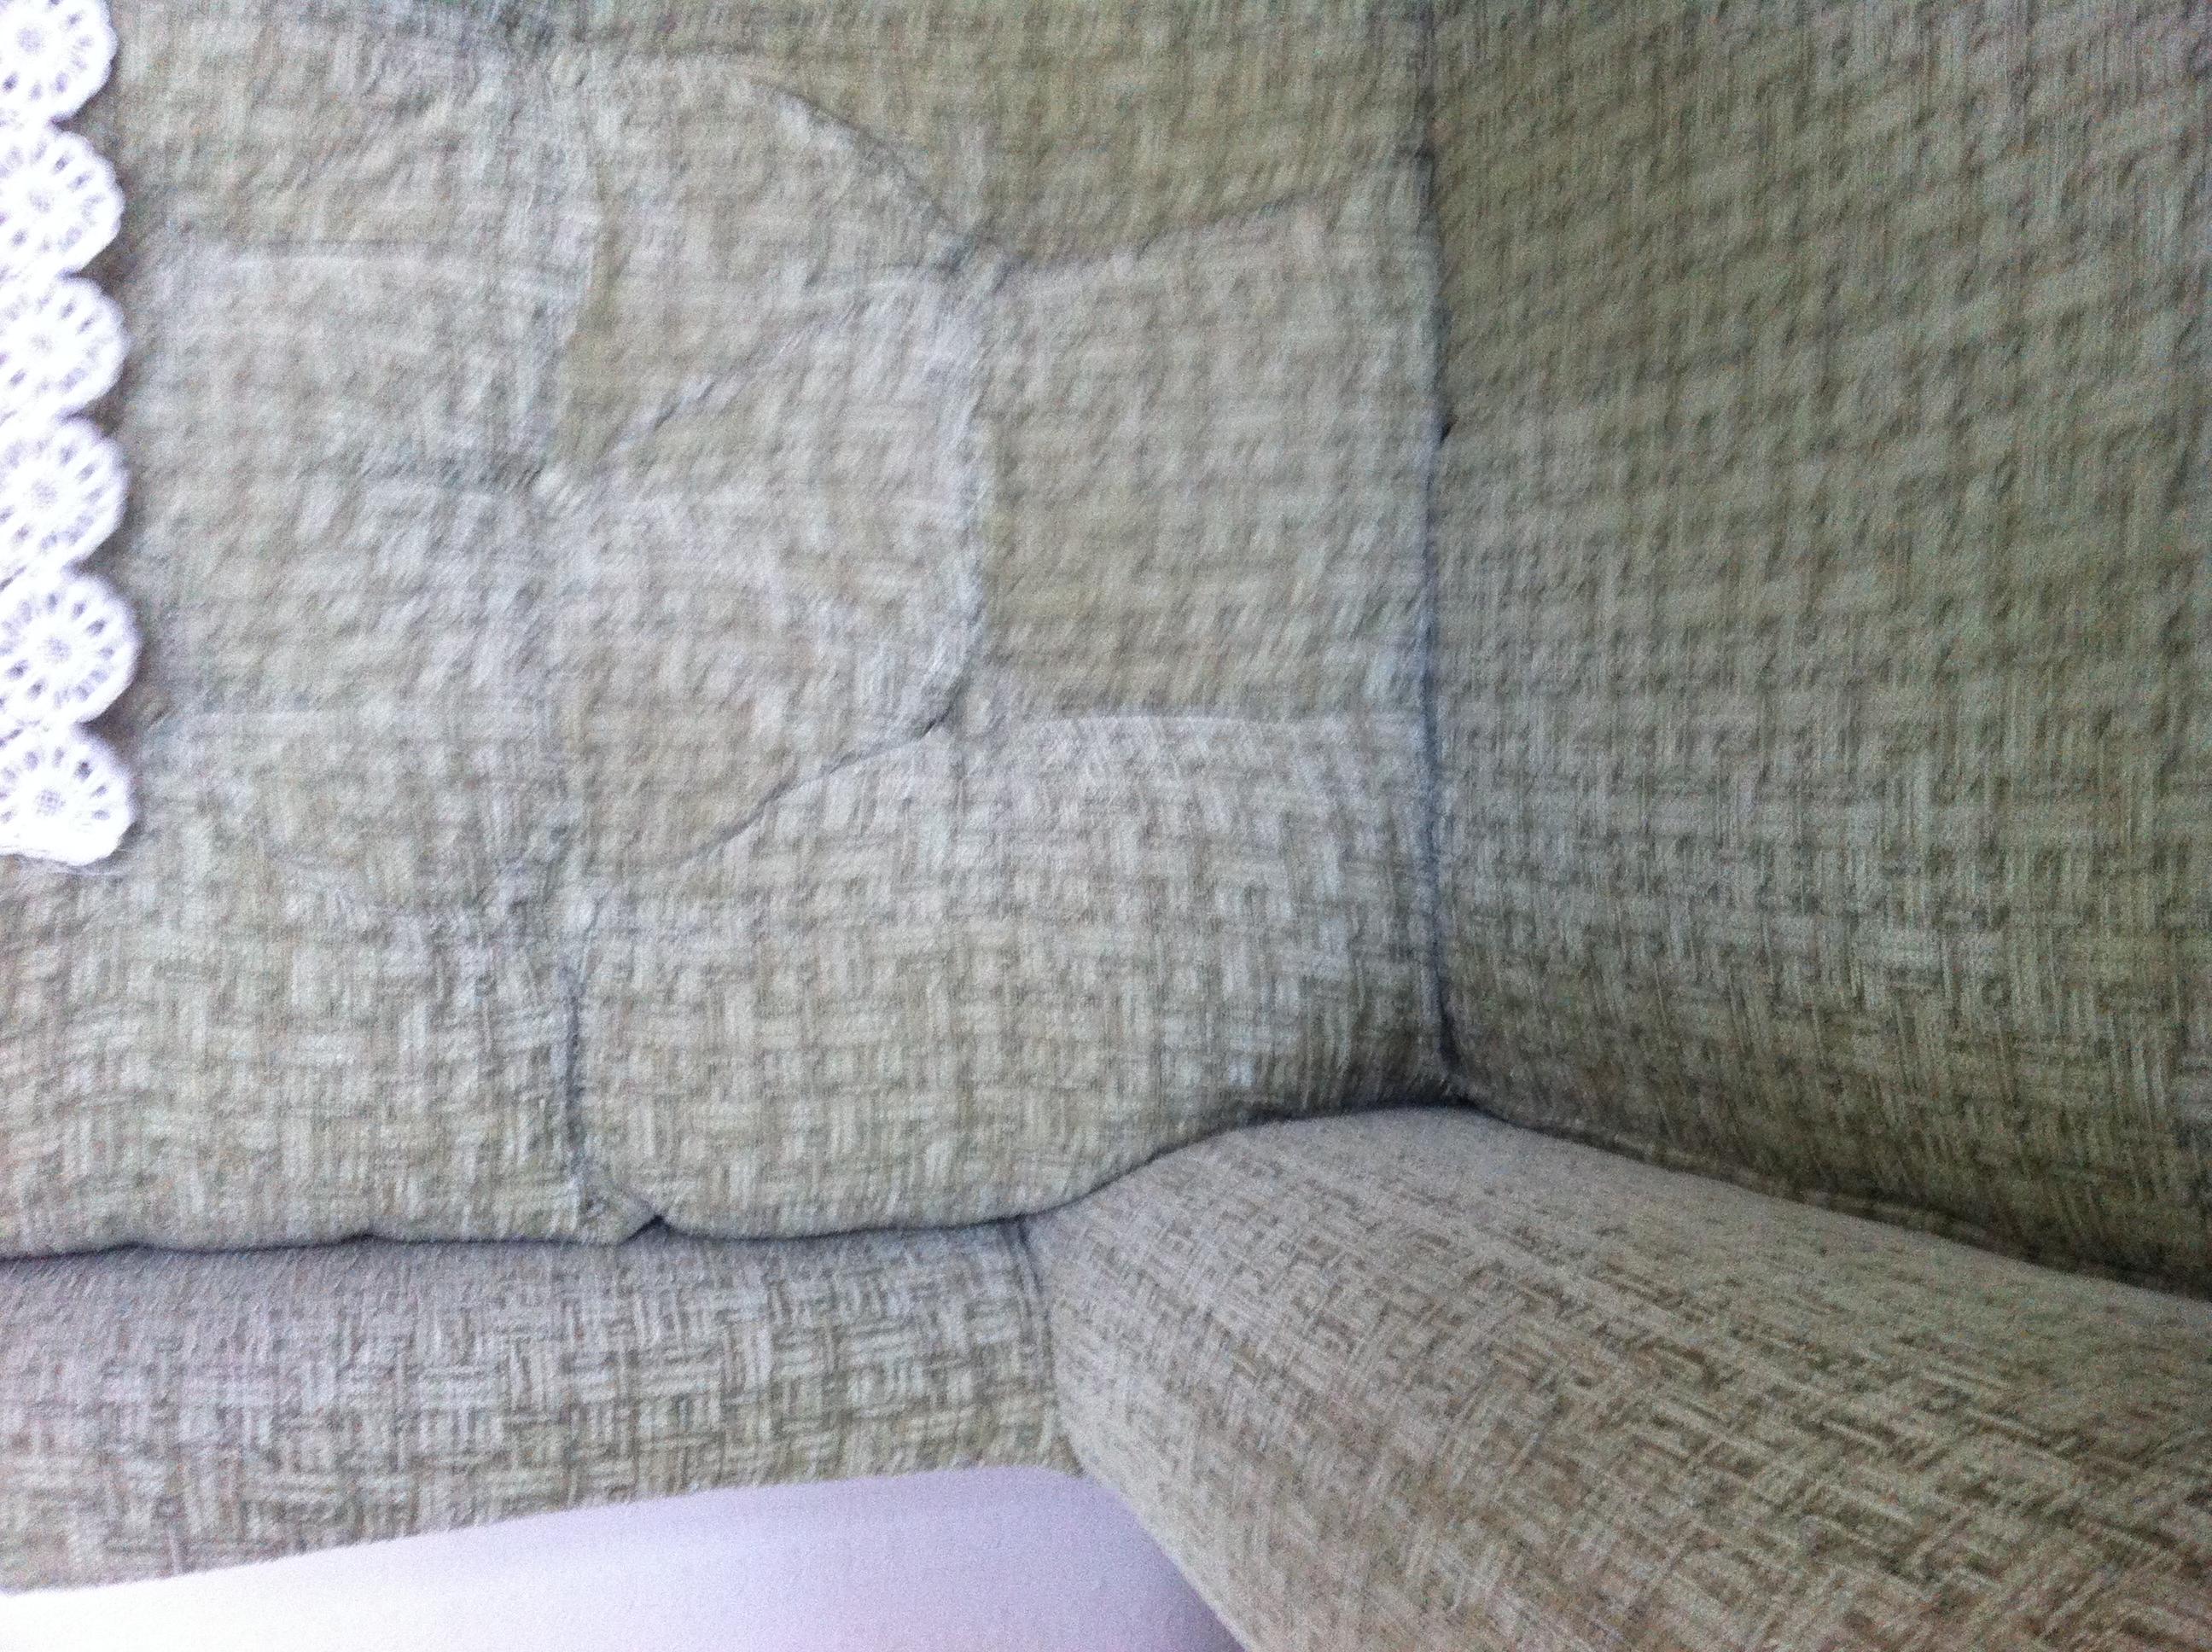 A photo captured by a person who is blind. A computer-generated caption for this photo is: A close up of a bed with a couch.